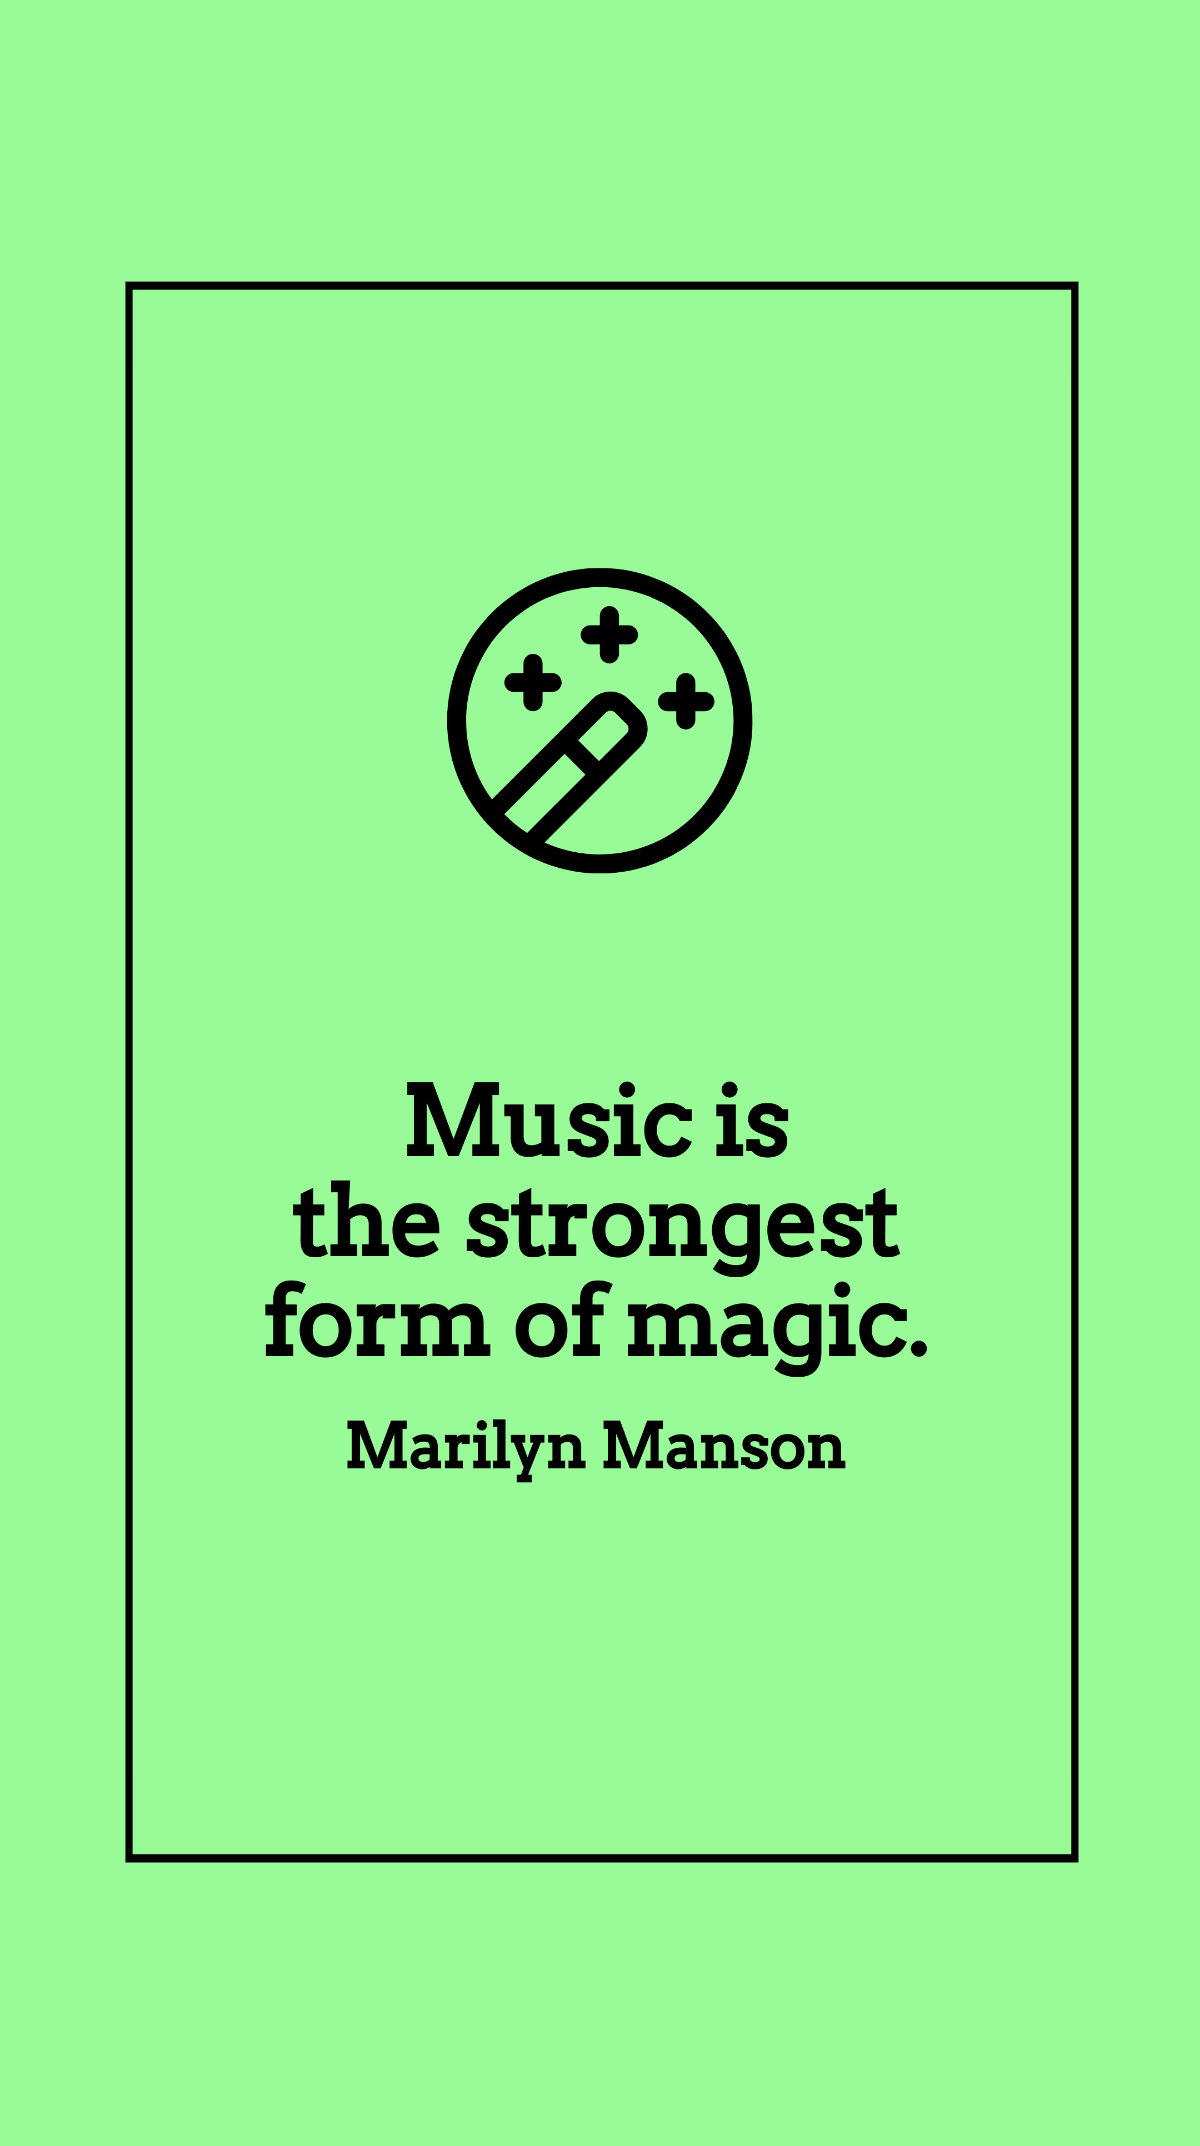 Marilyn Manson - Music is the strongest form of magic. Template